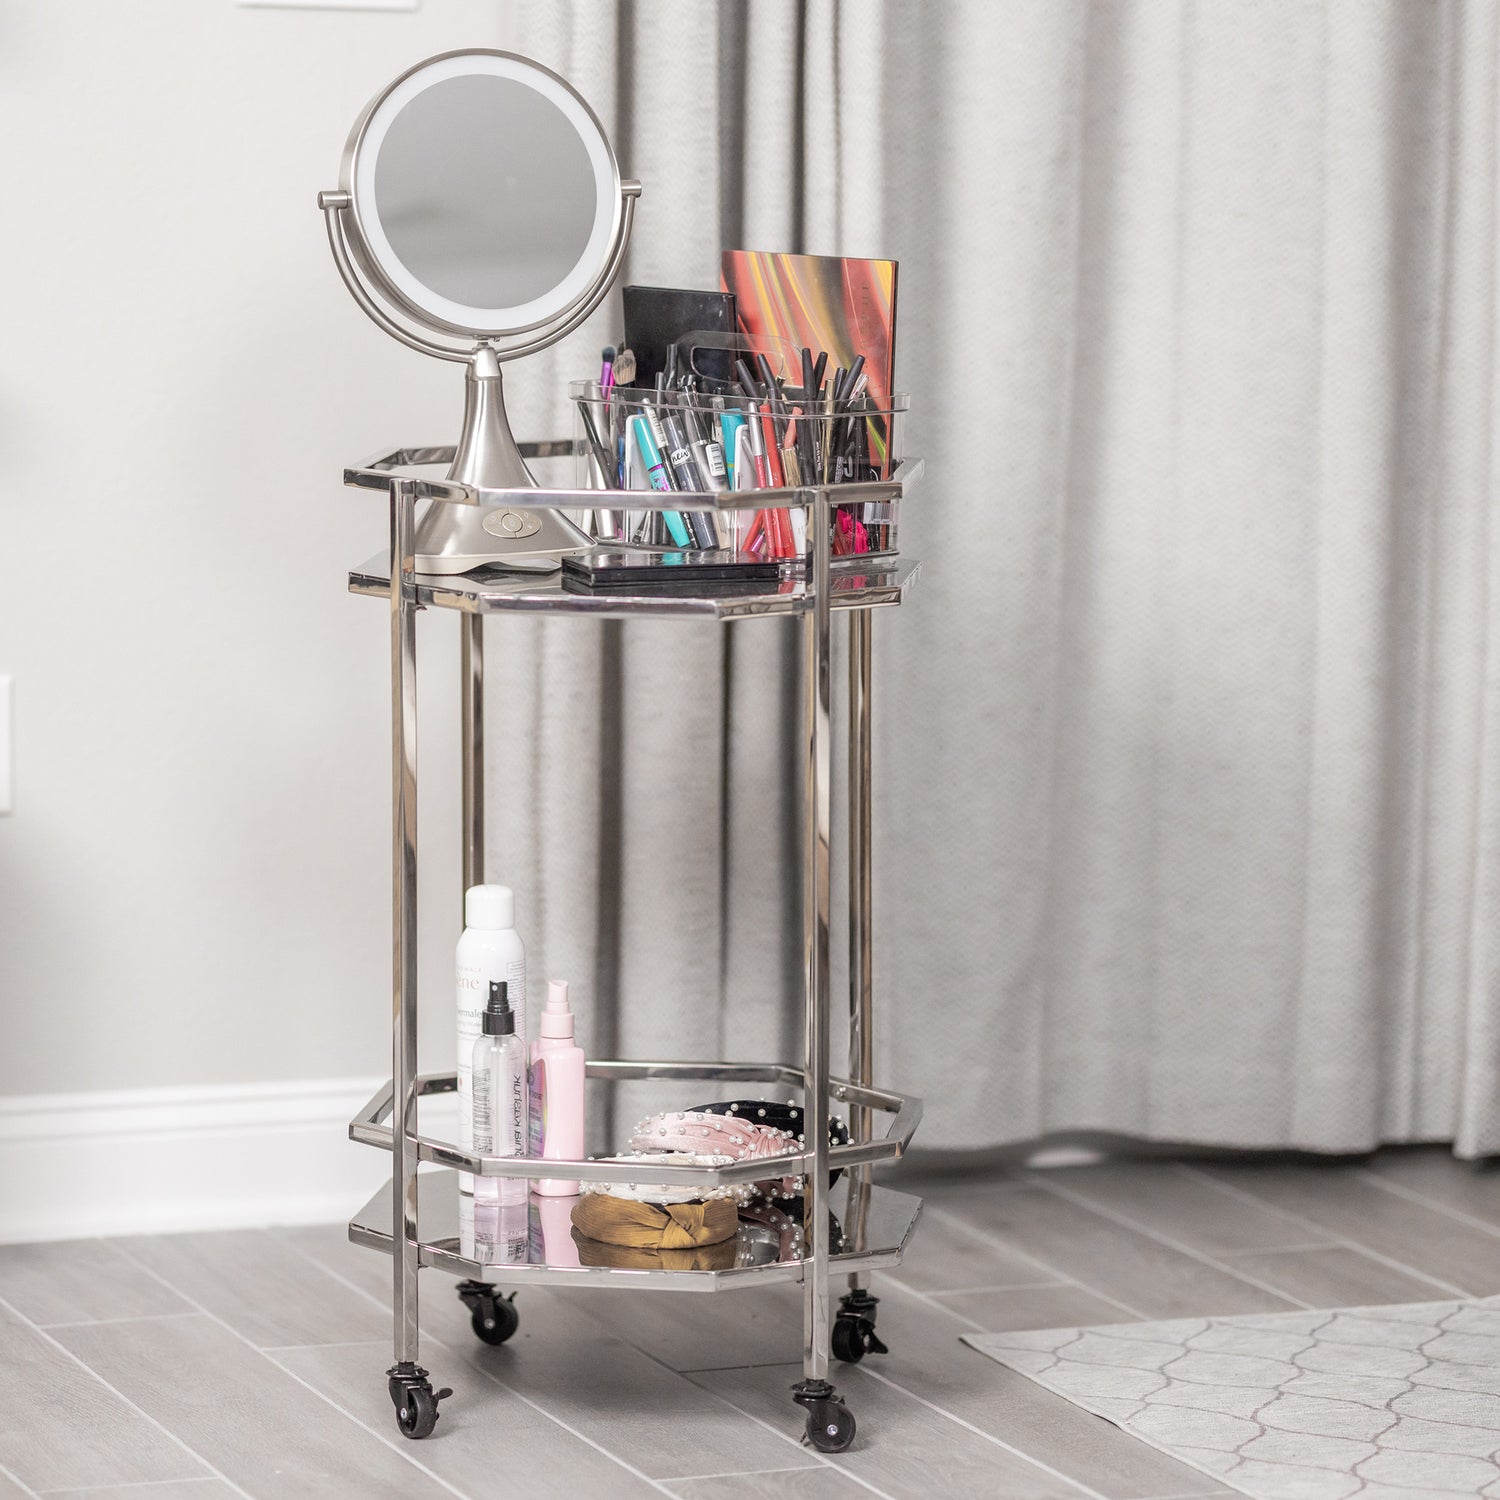 Portable vanity includes wheels for easy rolling.  Has two shelves to hold cosmetics or other personal items.